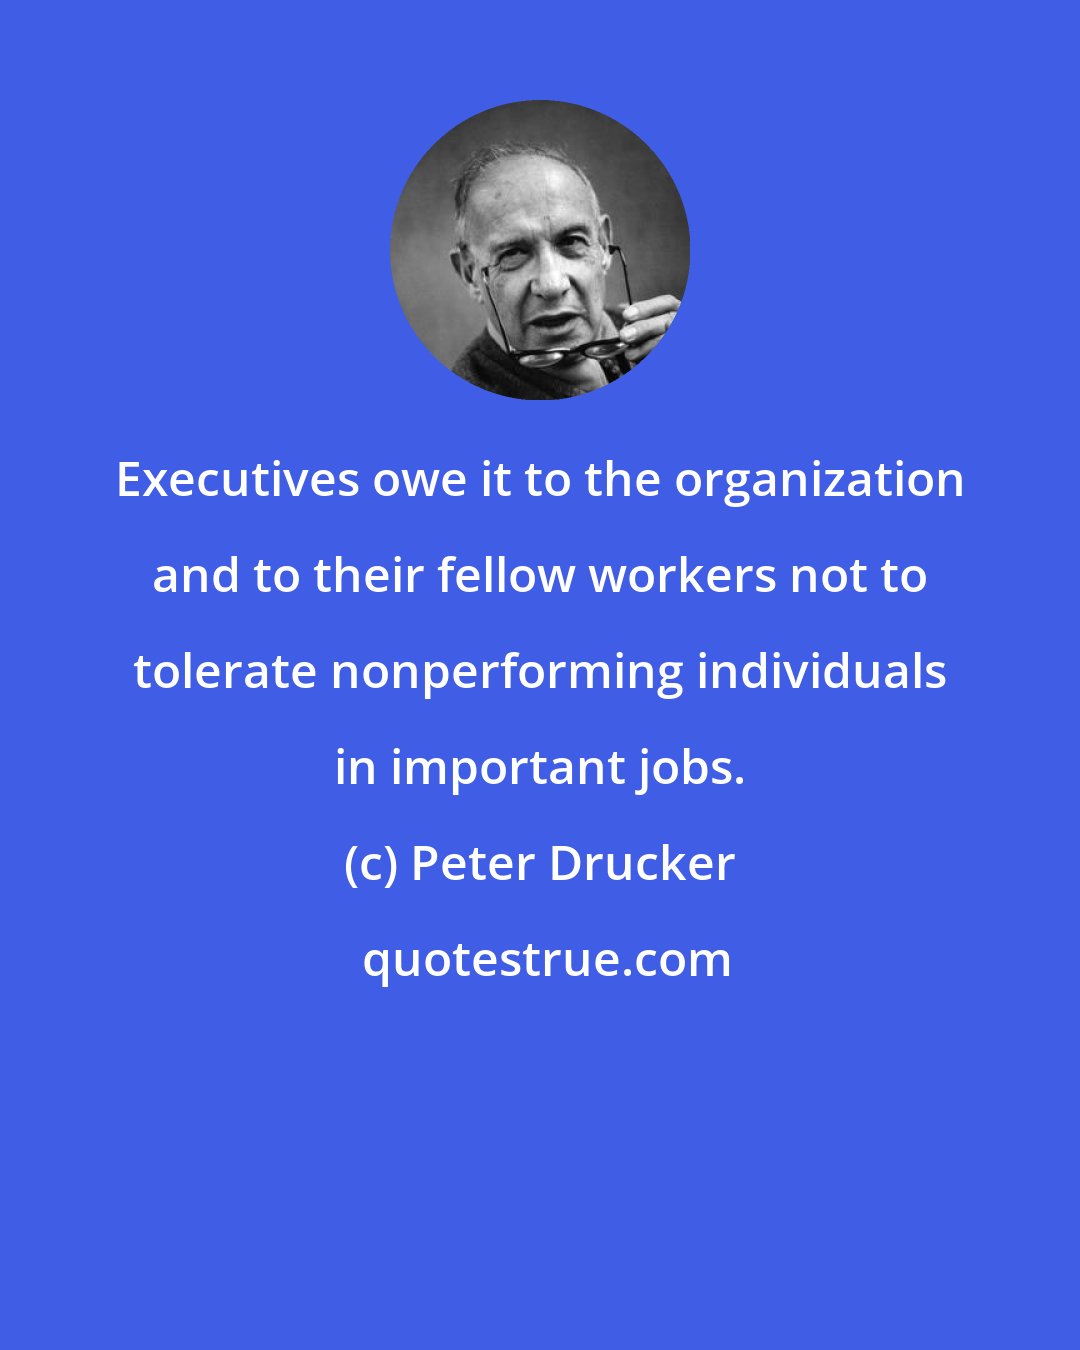 Peter Drucker: Executives owe it to the organization and to their fellow workers not to tolerate nonperforming individuals in important jobs.